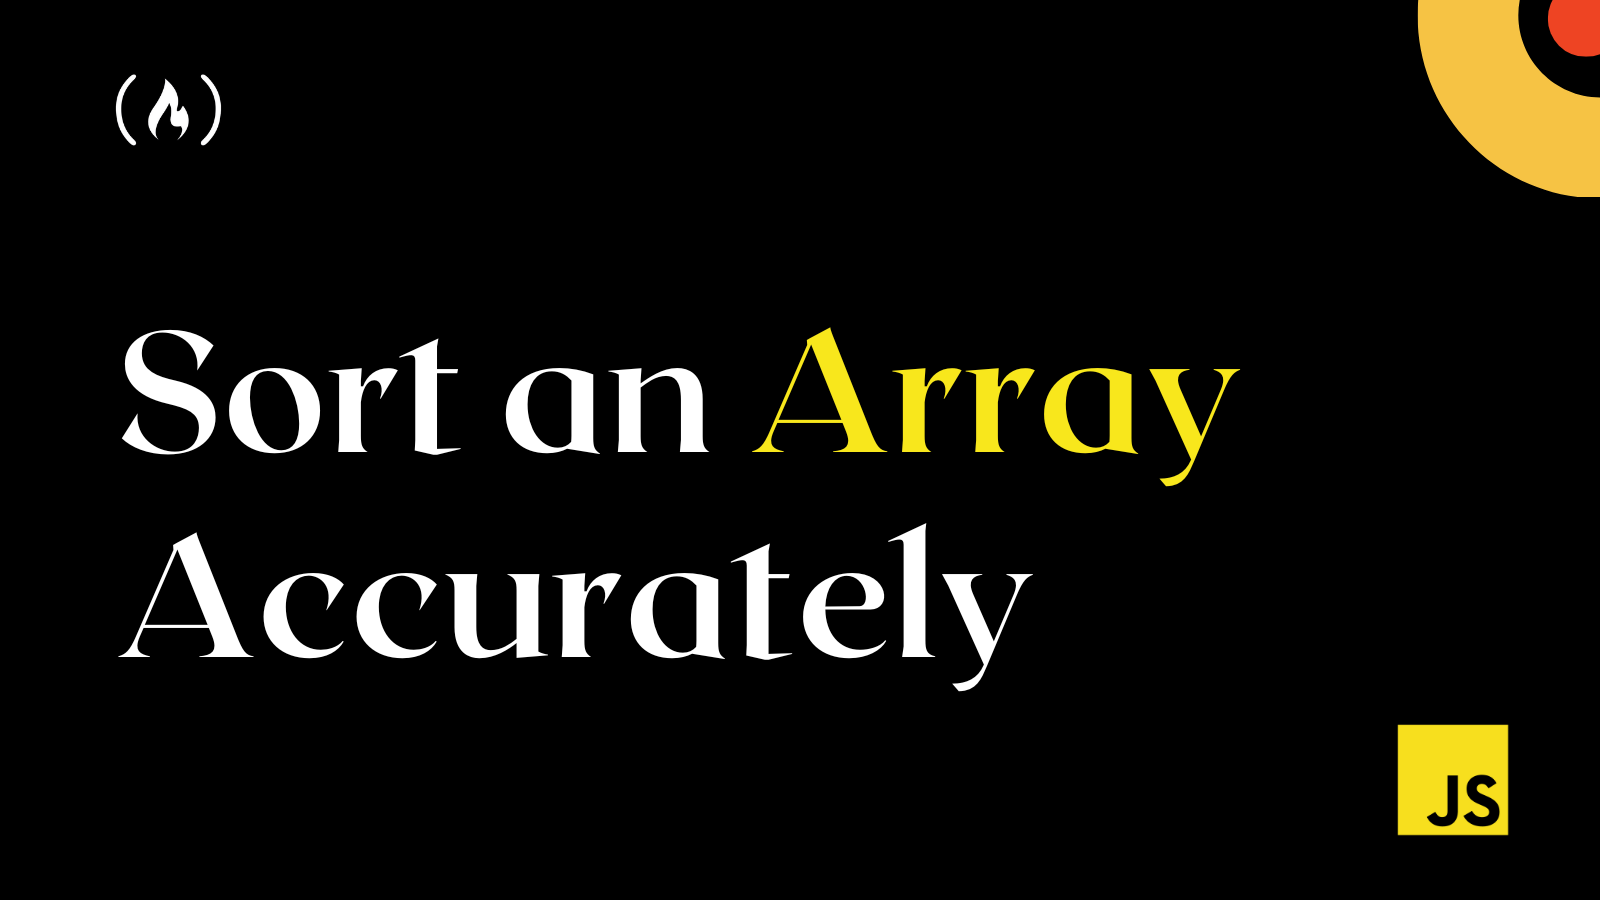 JavaScript Sort Array - How to Sort an Array Accurately